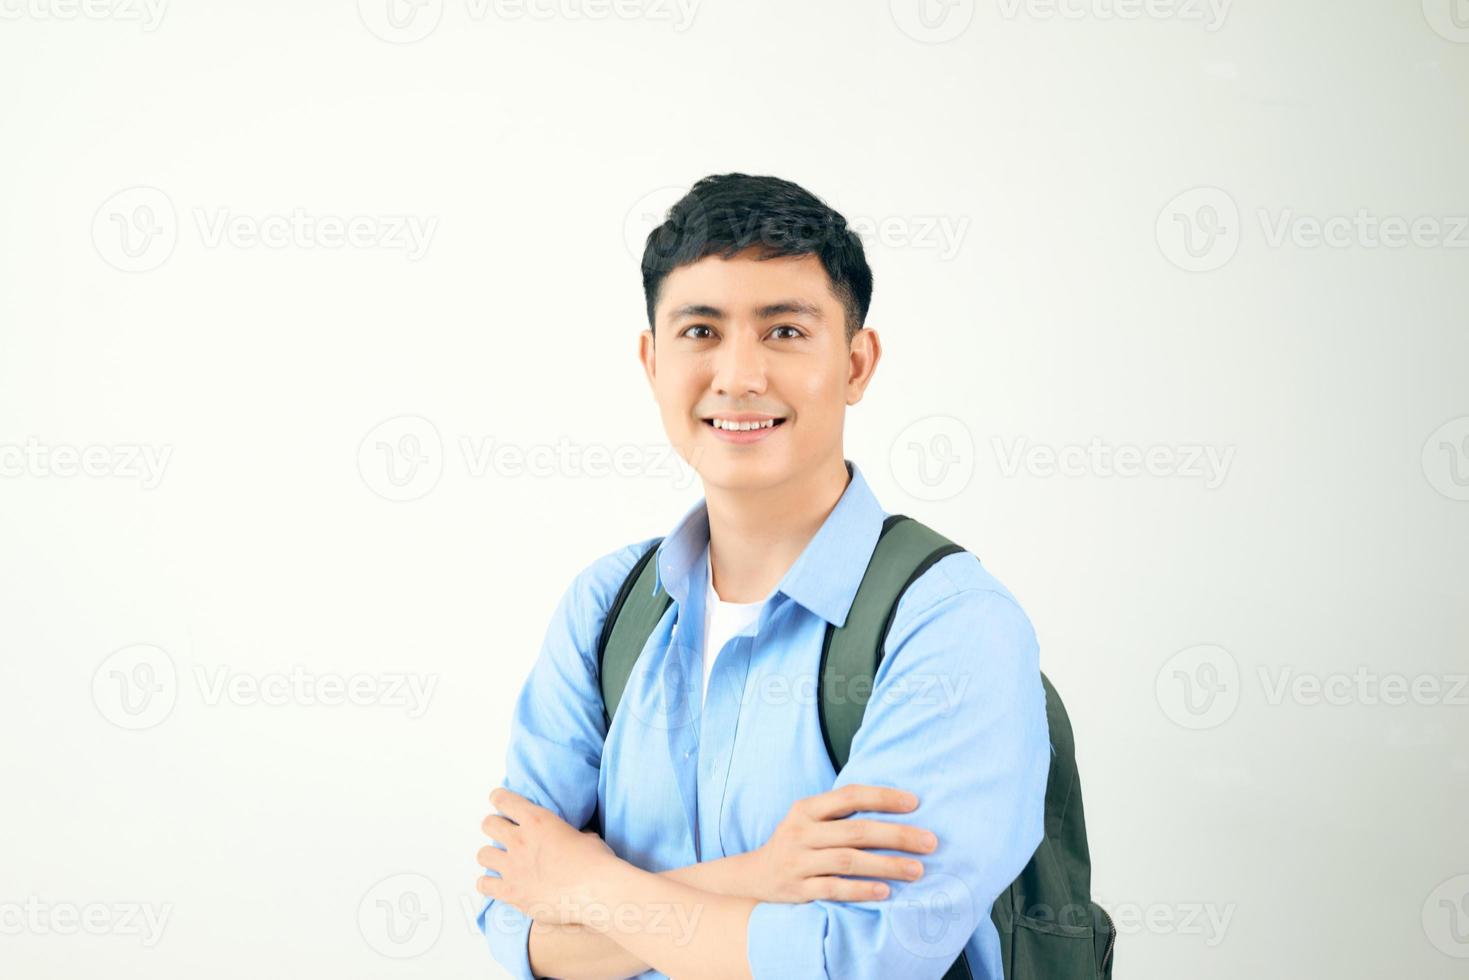 Handsome young man smiling and standing confidently on white background photo